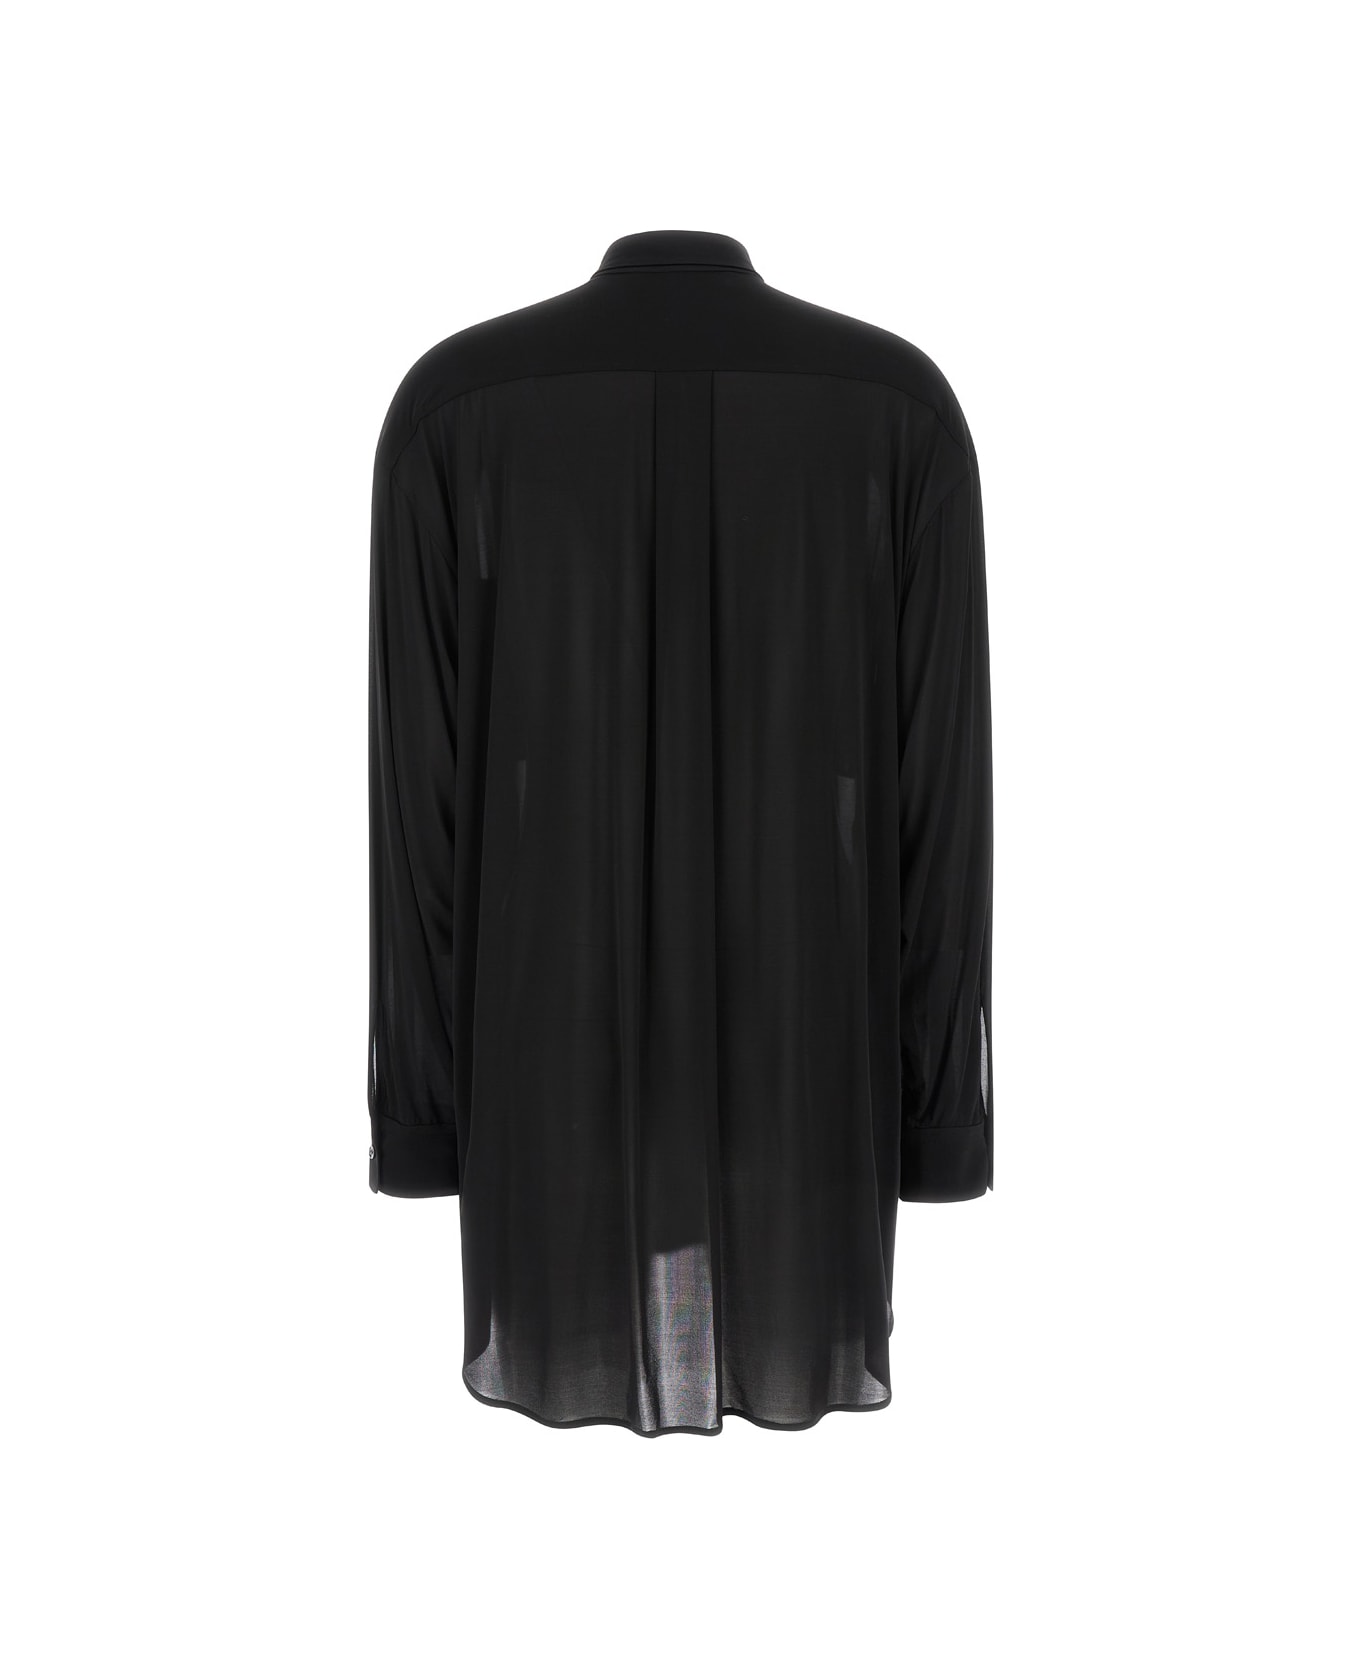 Philosophy di Lorenzo Serafini Oversized Black Shirt With Patch Pockets In Stretch Viscose Woman - Black シャツ